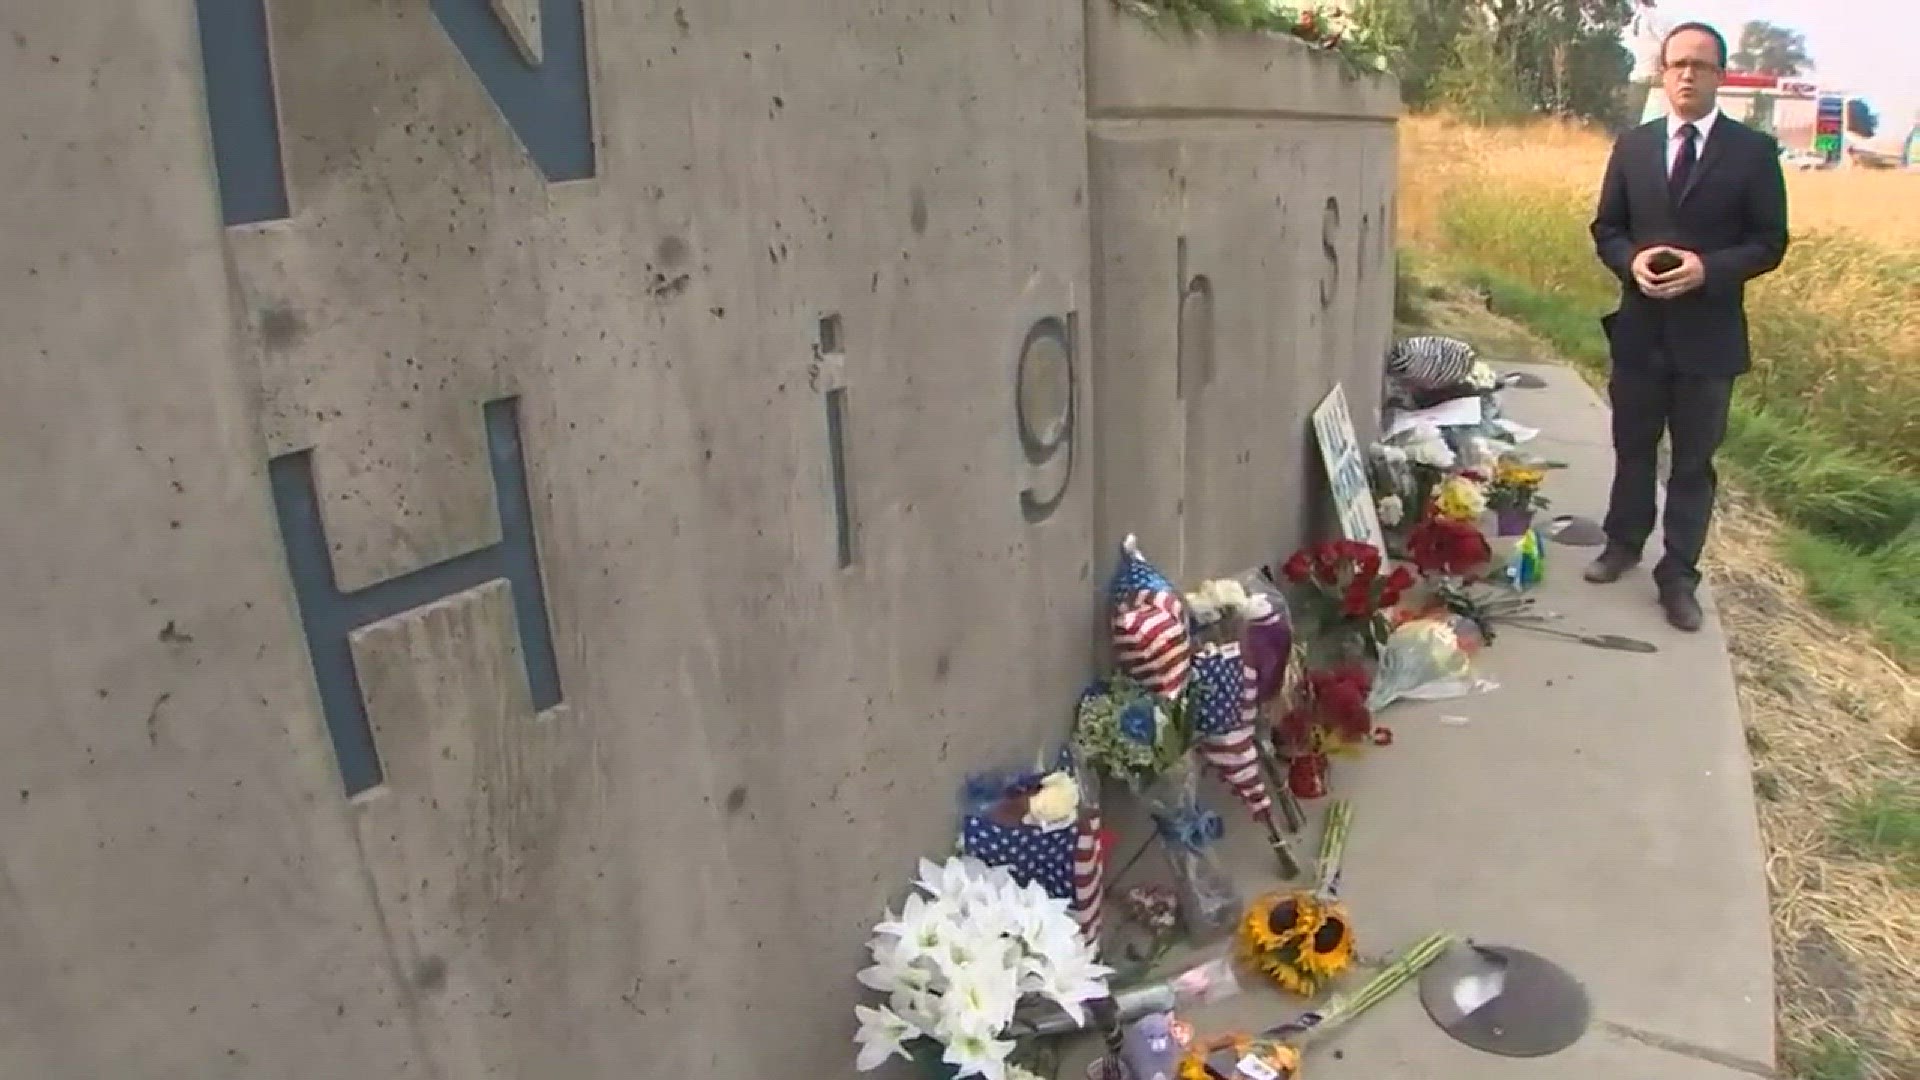 KING 5's Alex Rozier reports on how one family had the Freeman community rally behind them years ago when they lost one of their own, and now they are repaying the favor after a fatal shooting at the high school. (9/14/17)